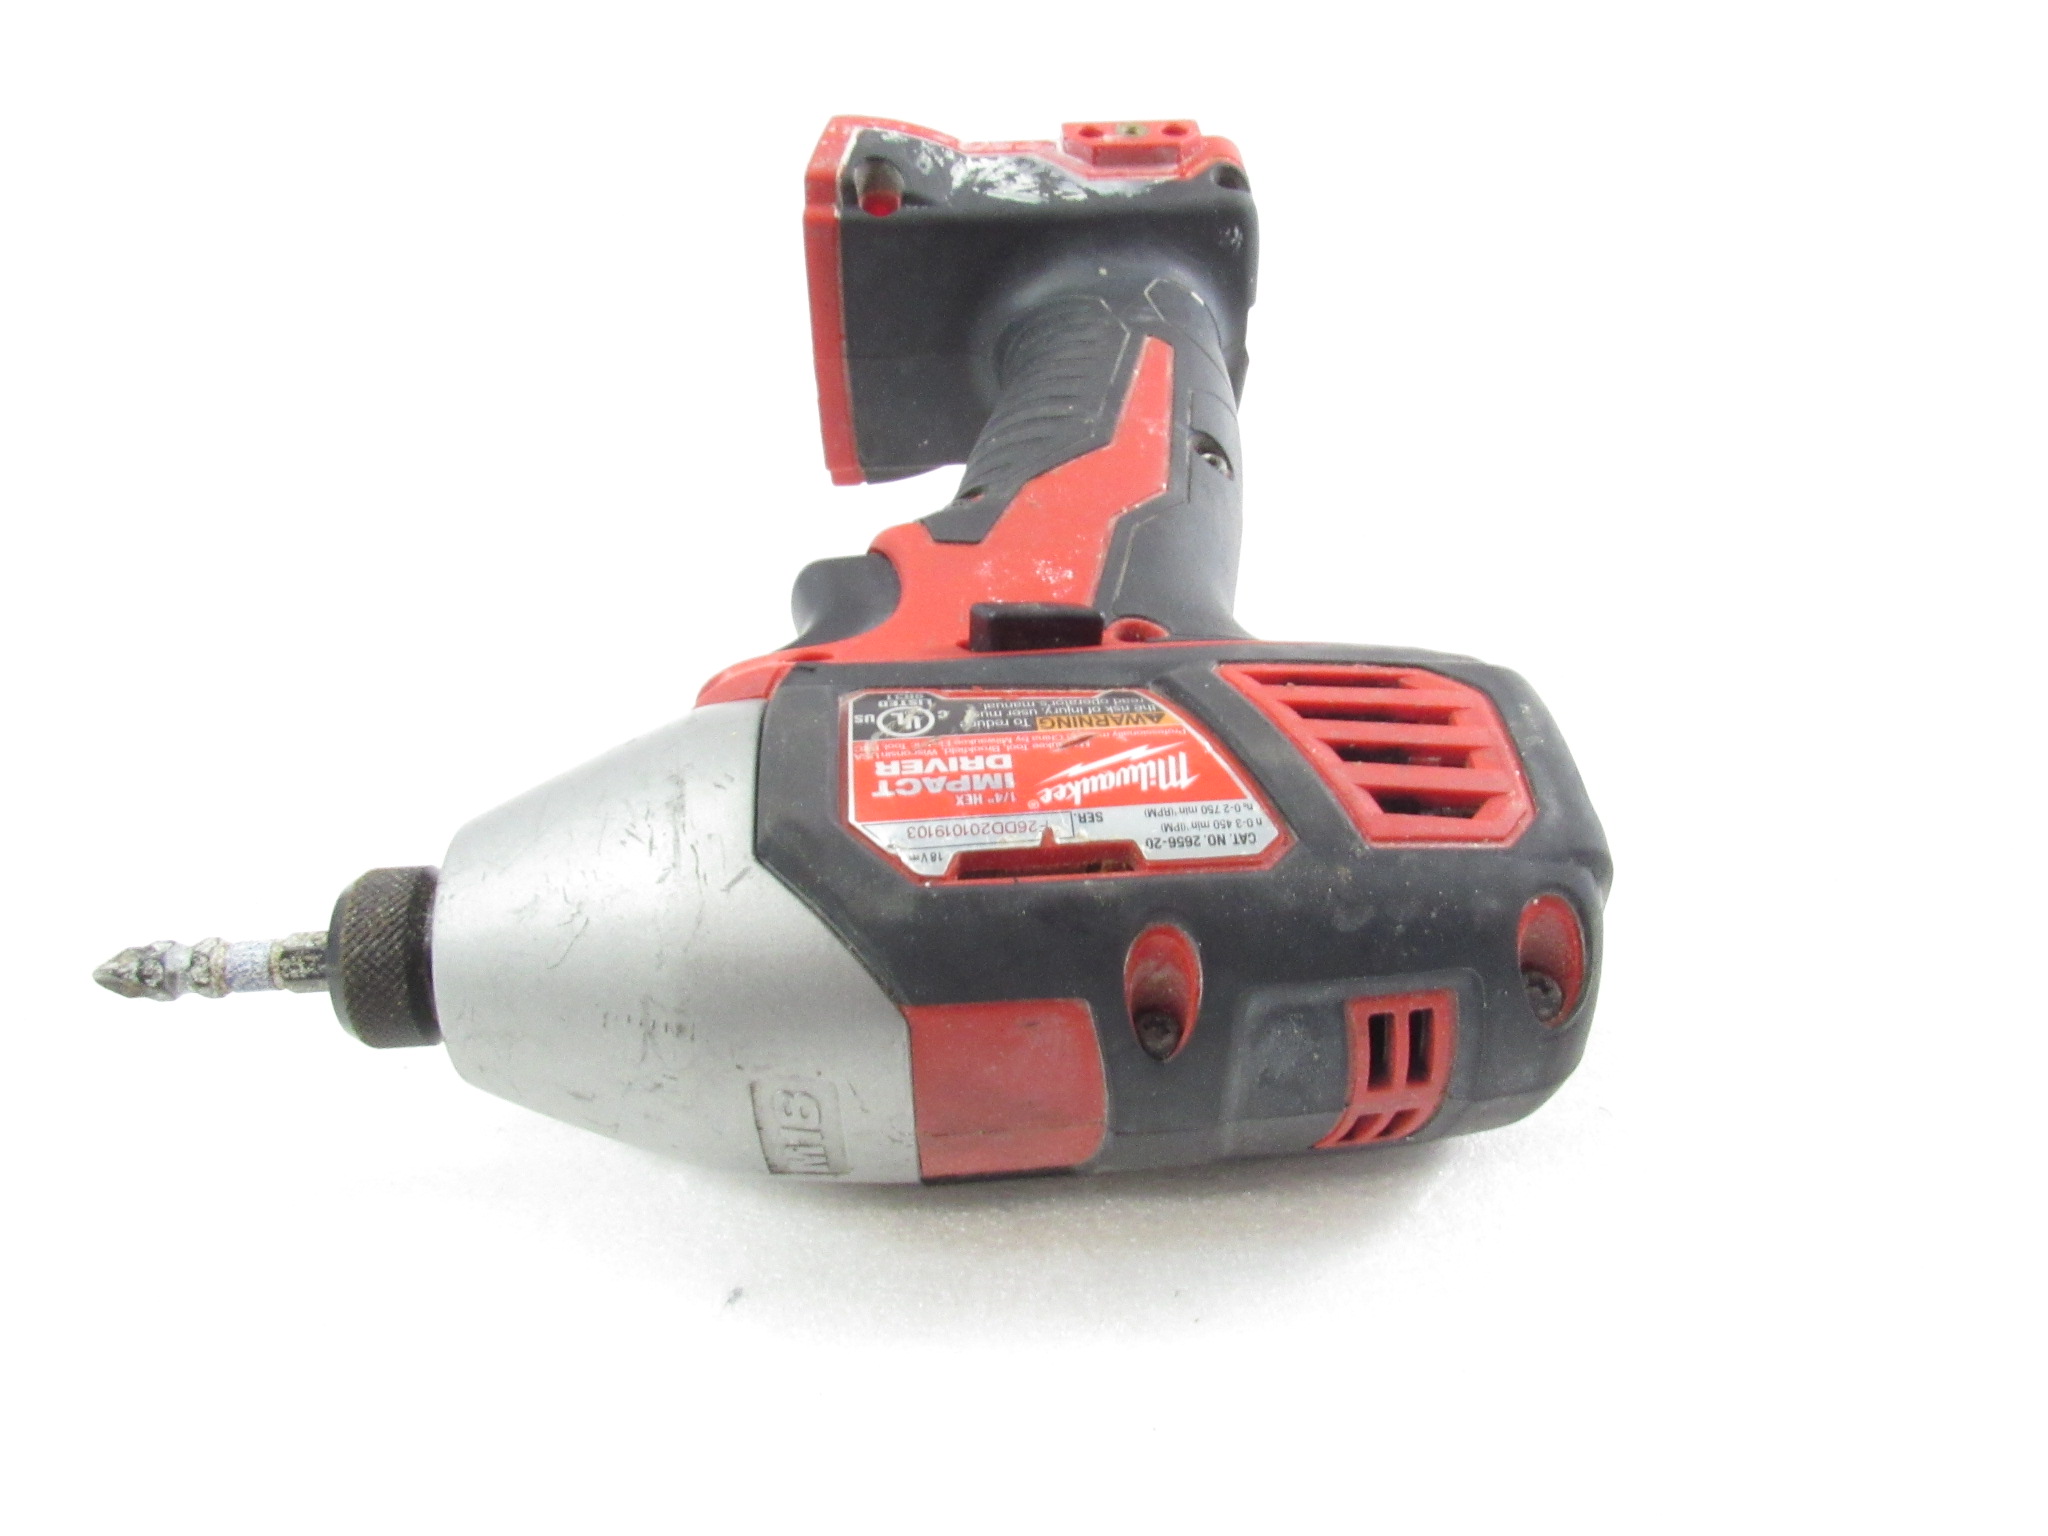 18-volt Cordless two Speed 1/4 Hex Impact Driver - tool only